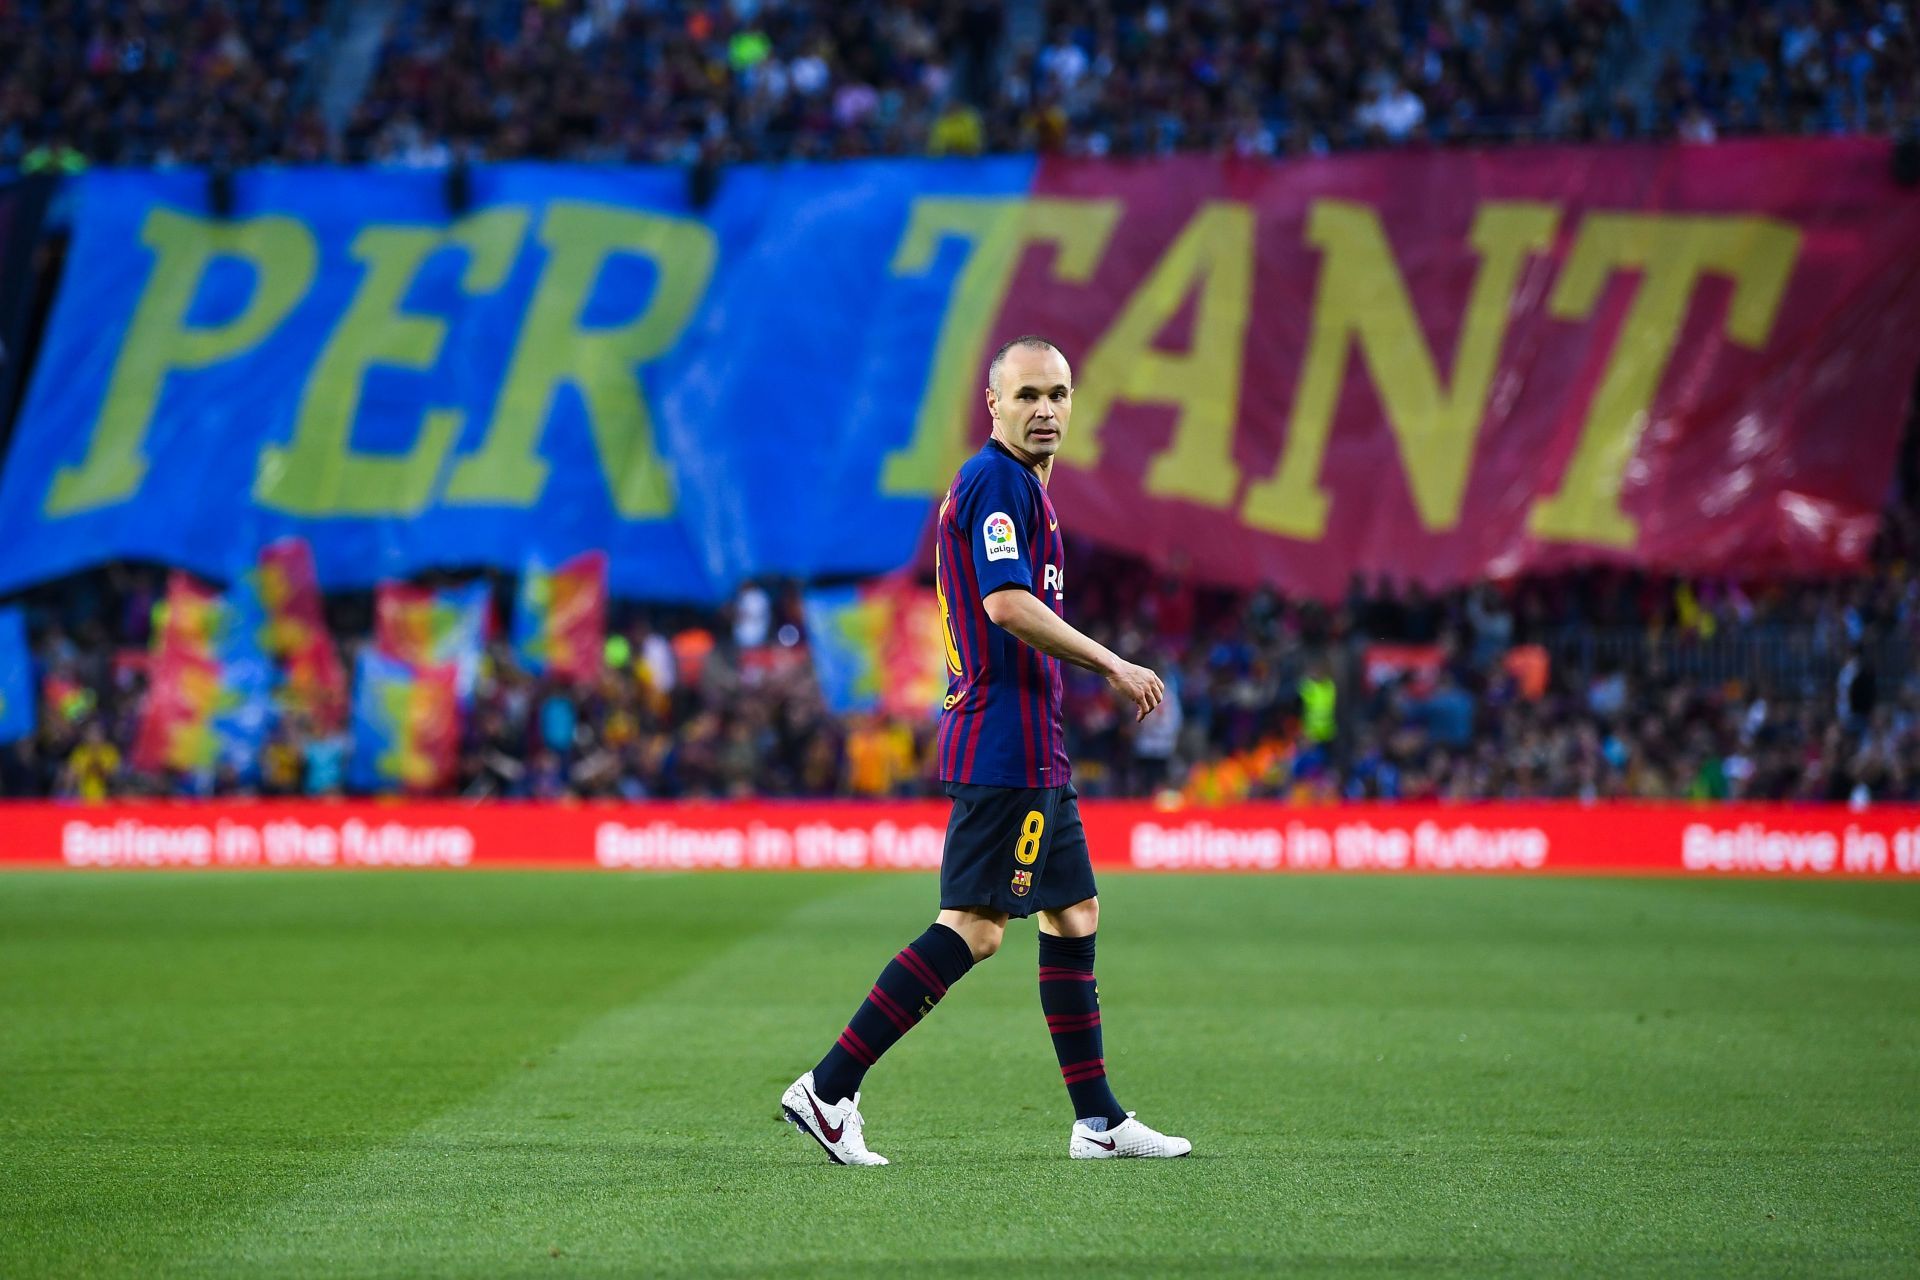 Andres Iniesta won two trebles with Barcelona